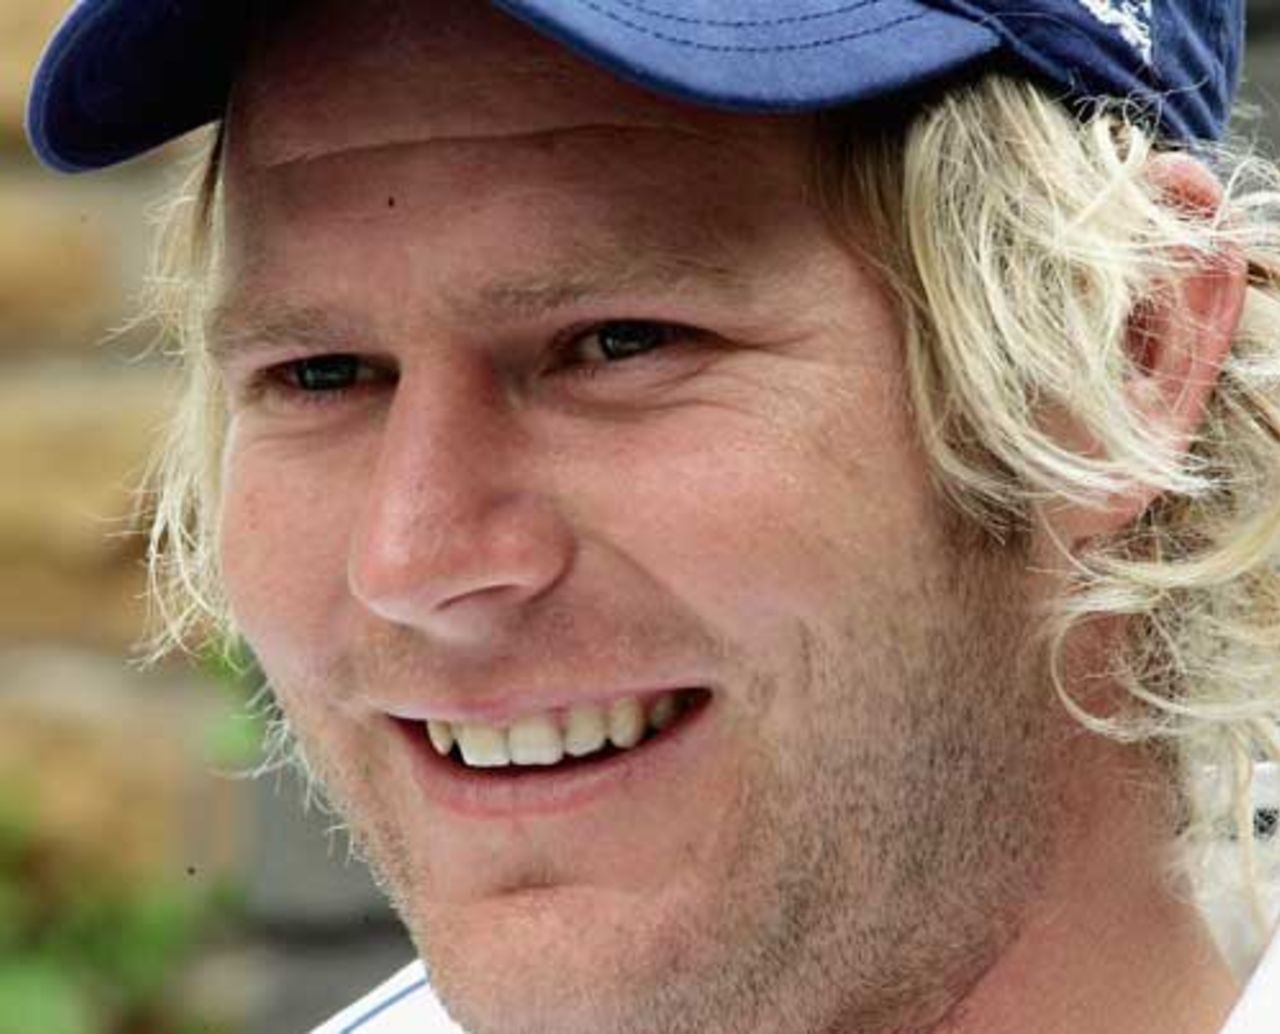 Matthew Hoggard reflects on his match-winning efforts at Trent Brdge where he guided England to victory with Ashley Giles, Nottingham, August 29, 2005